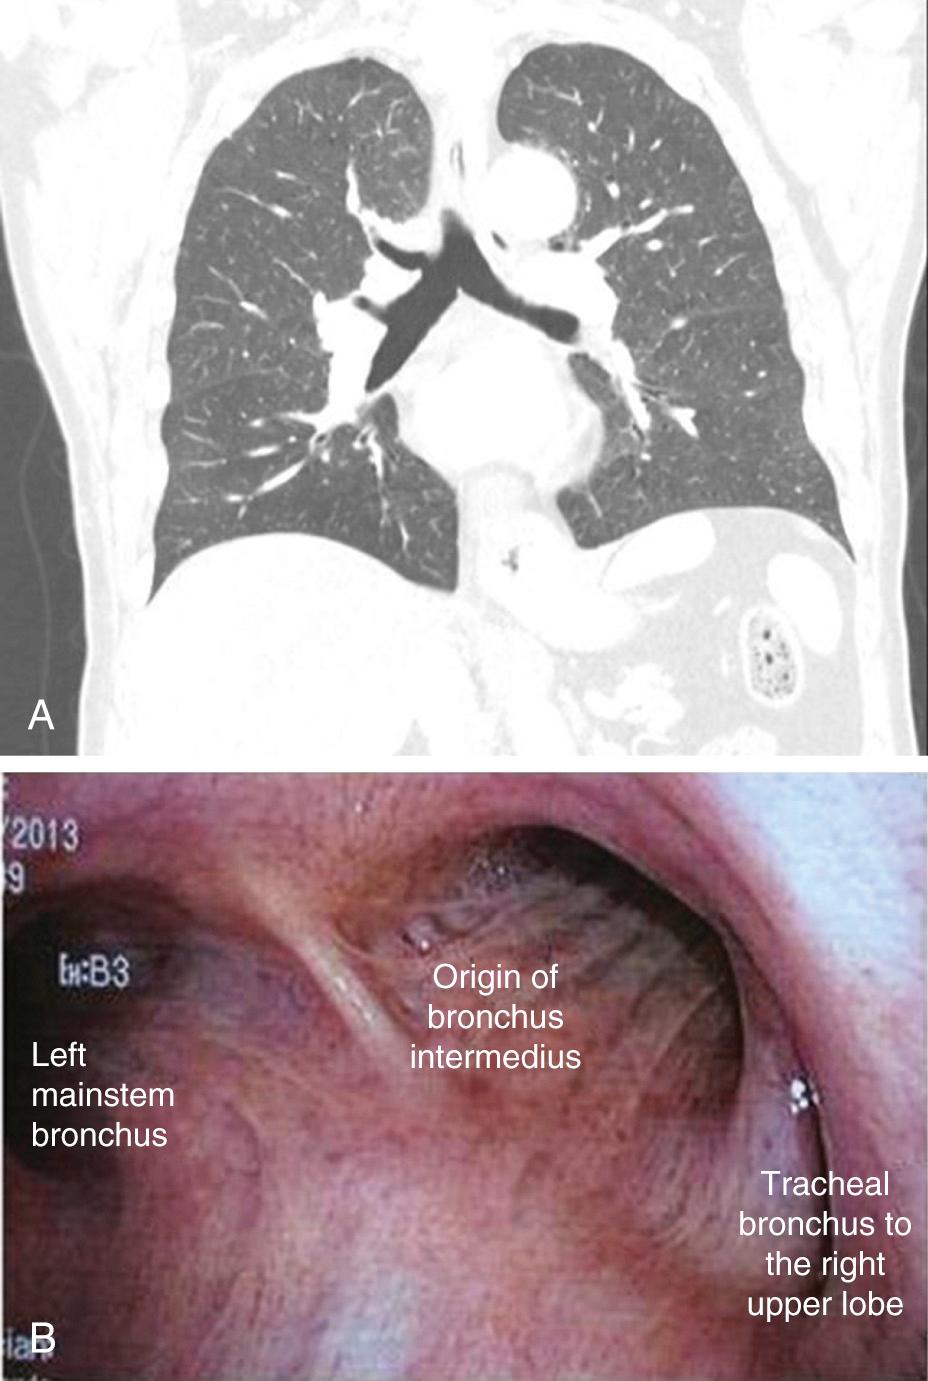 FIGURE 9-5, A, Coronal view of a computed tomography scan showing a tracheal bronchus. B, Bronchoscopic view of the origin of the right upper lobe bronchus from the trachea.